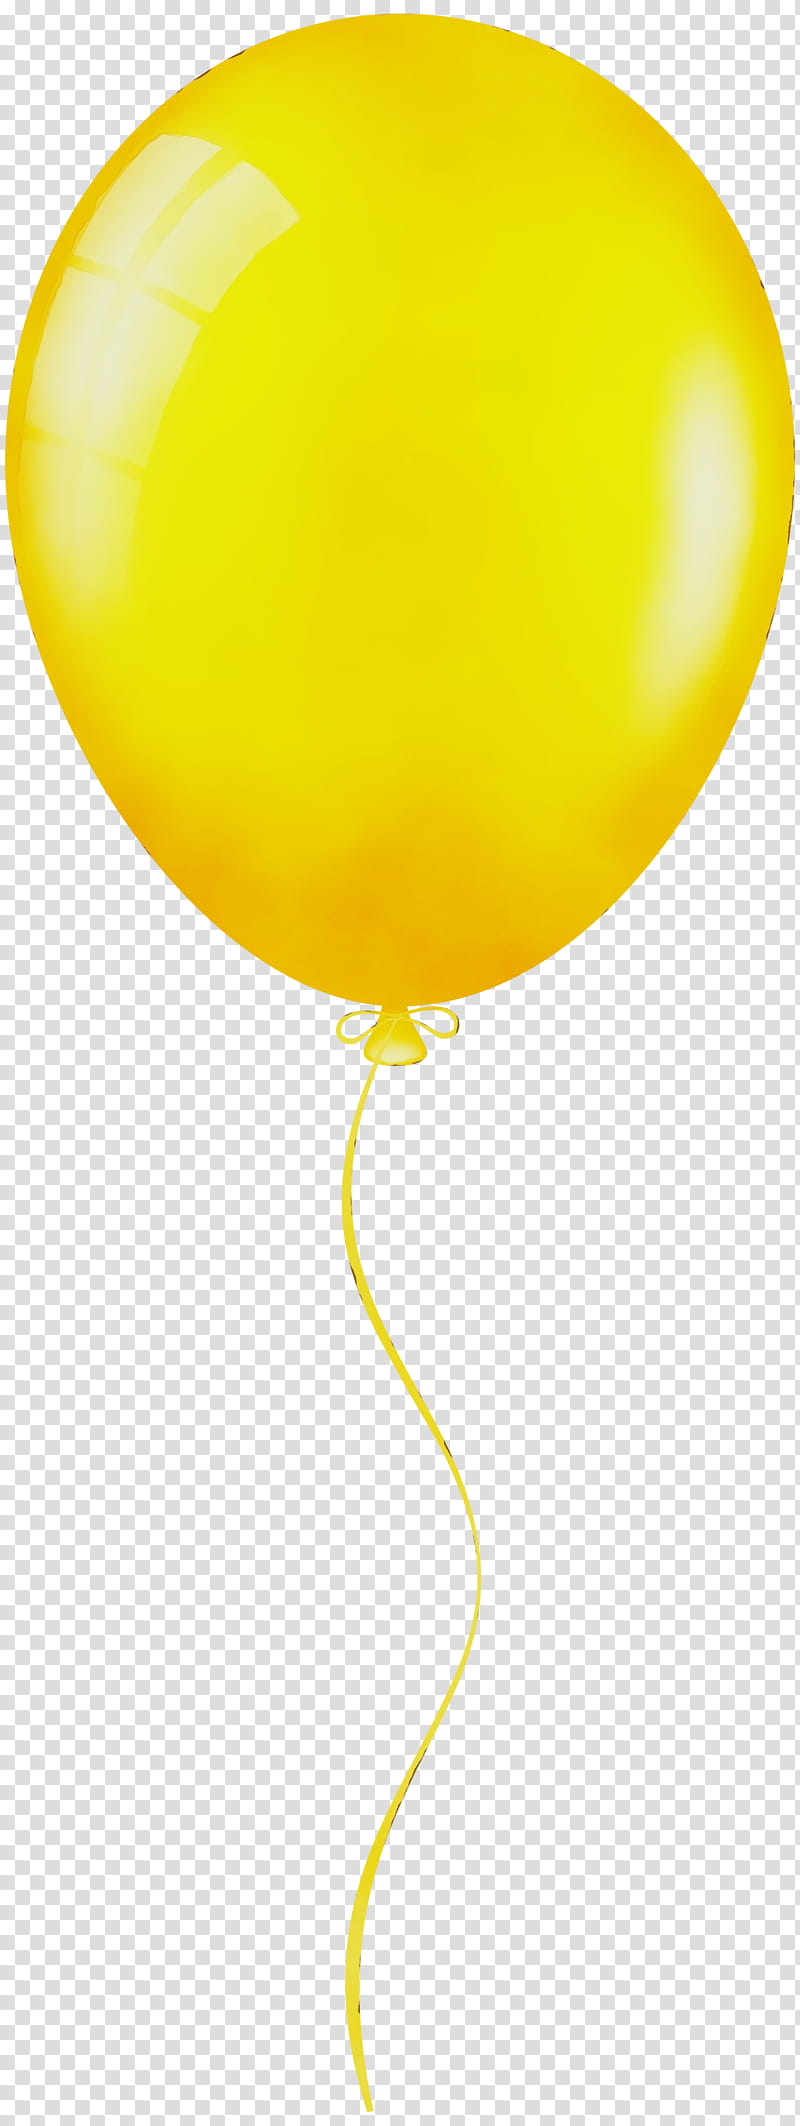 Yellow Balloons Cluster ballooning Birthday, Watercolor, Paint, Wet Ink, Birthday
, Party Supply, Line, Smile transparent background PNG clipart